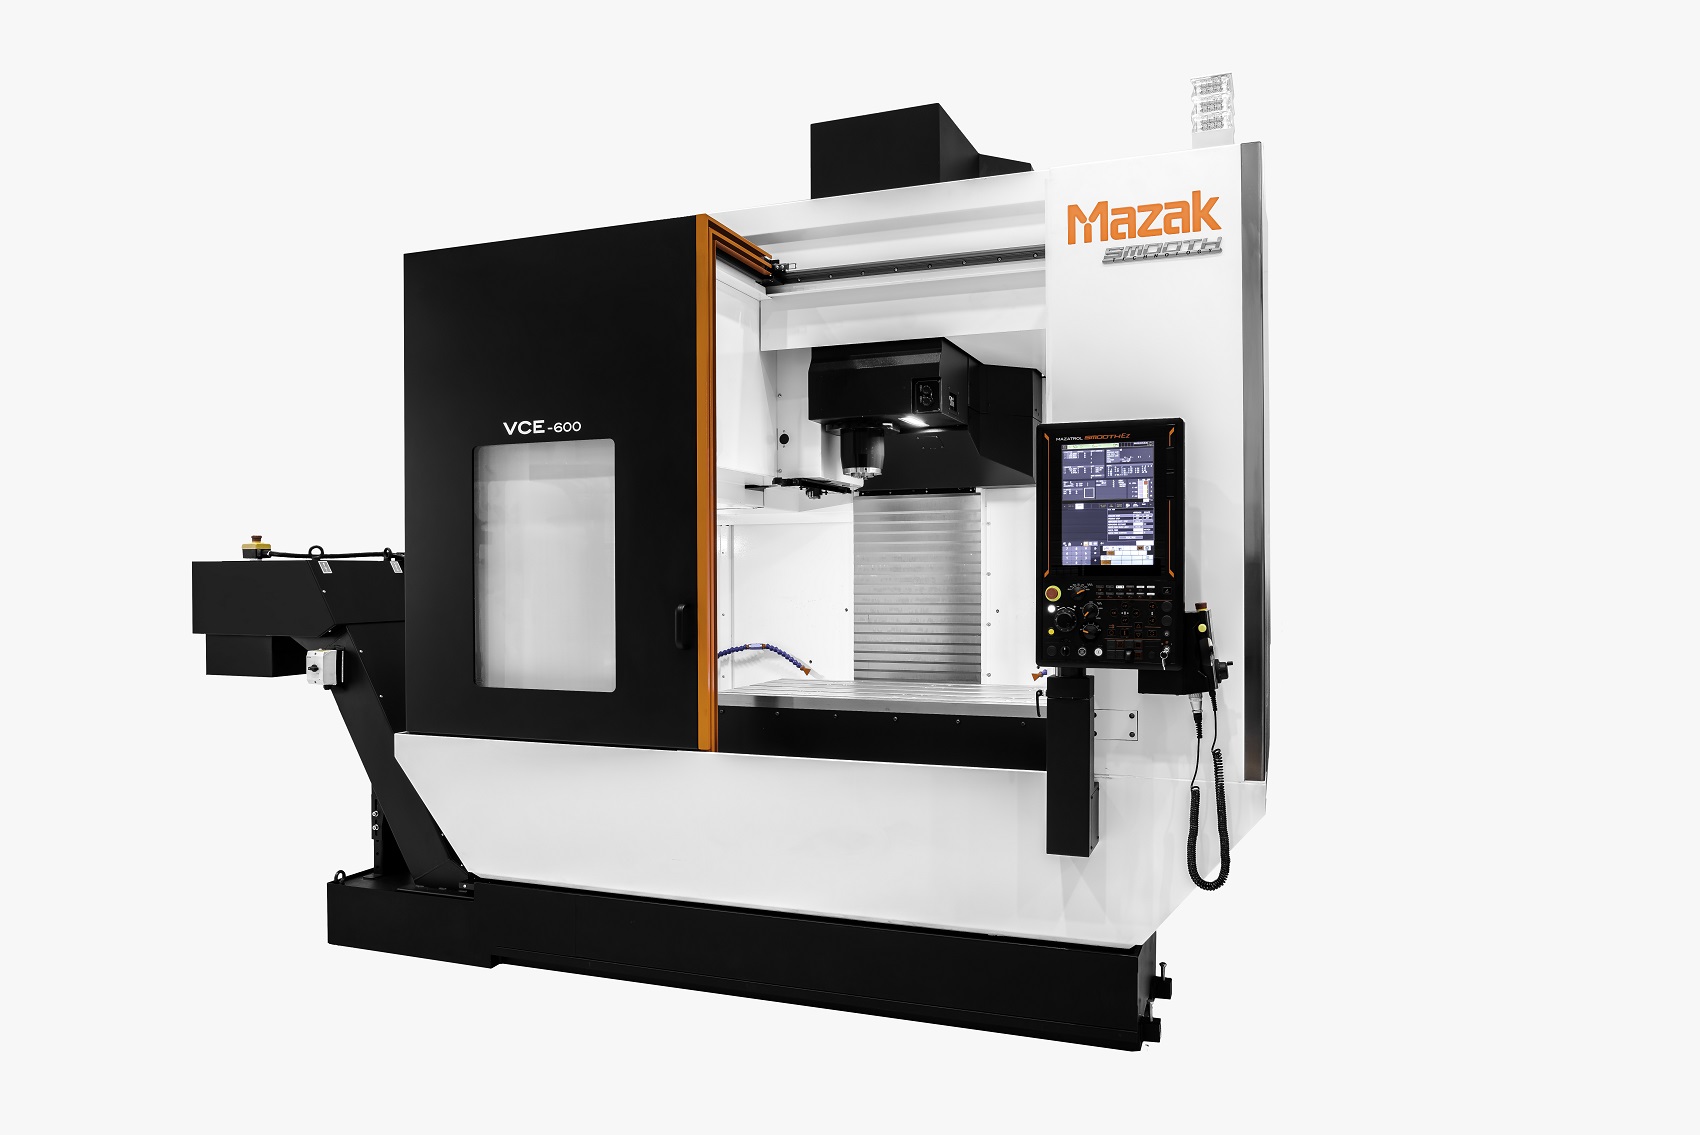 Entry-level machine with large Y-axis stroke